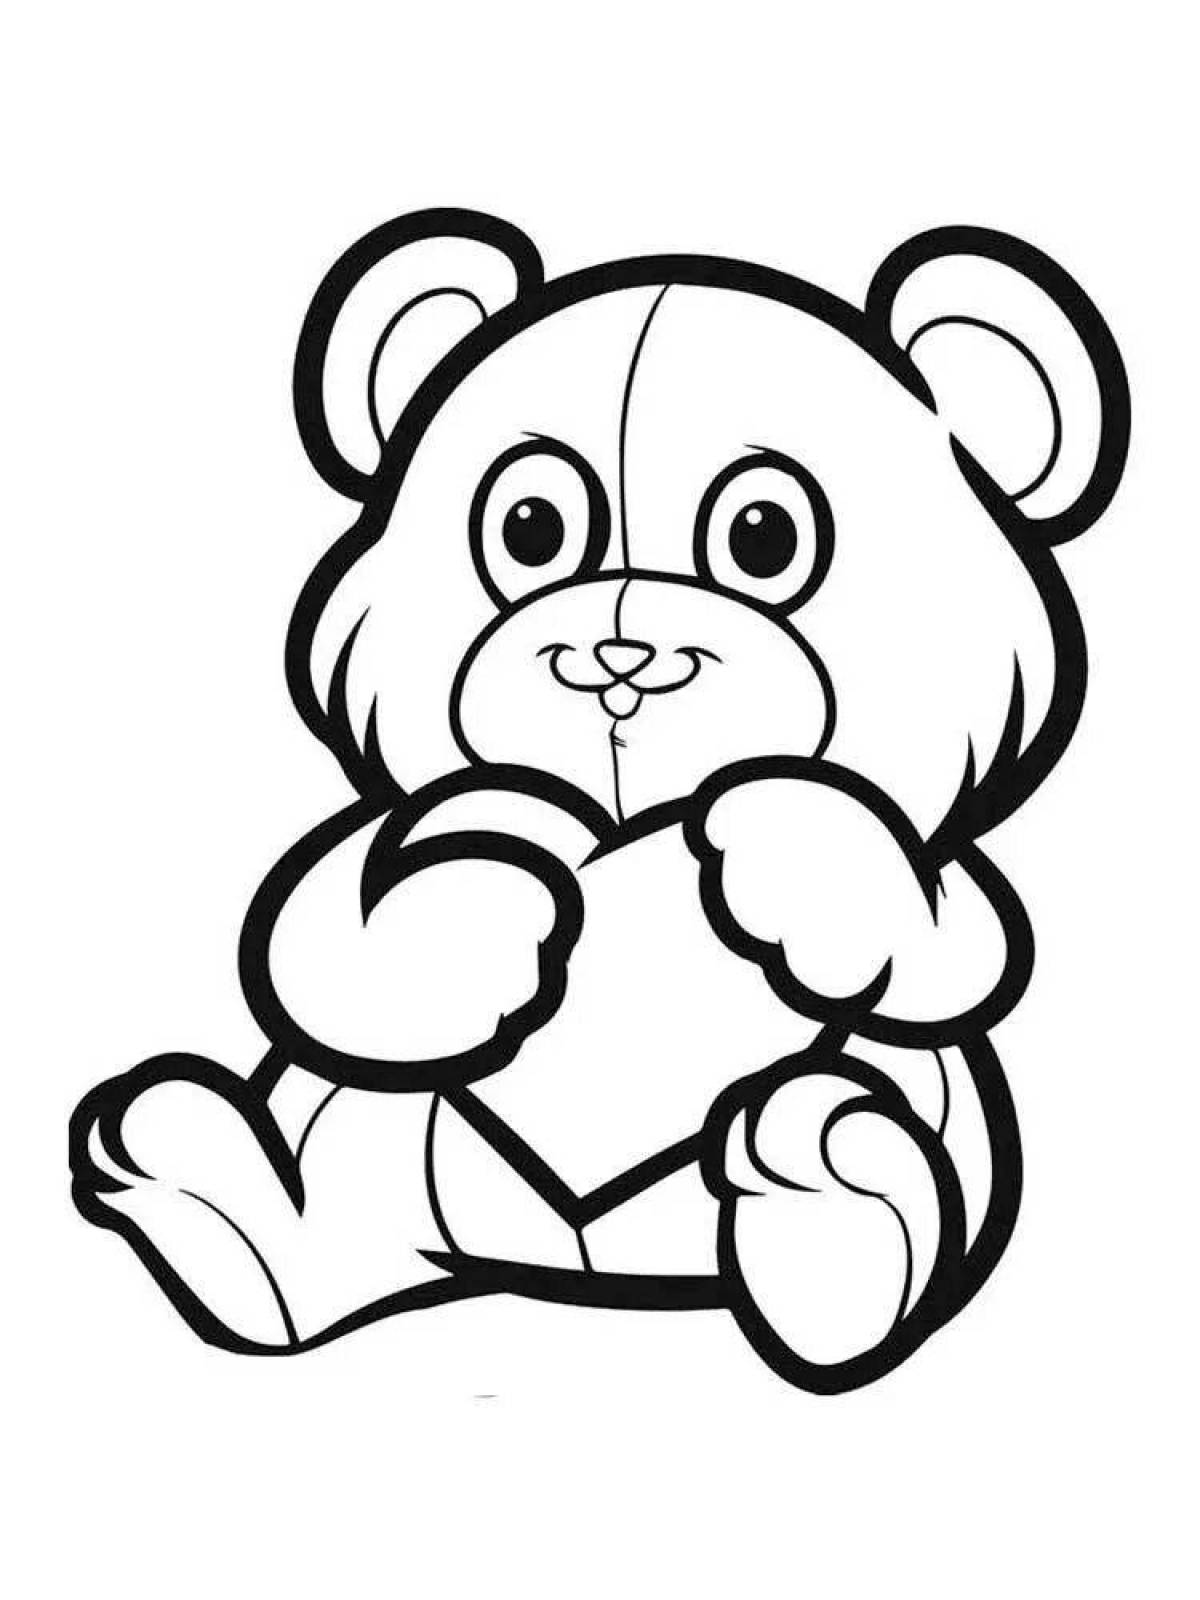 Bright light coloring page